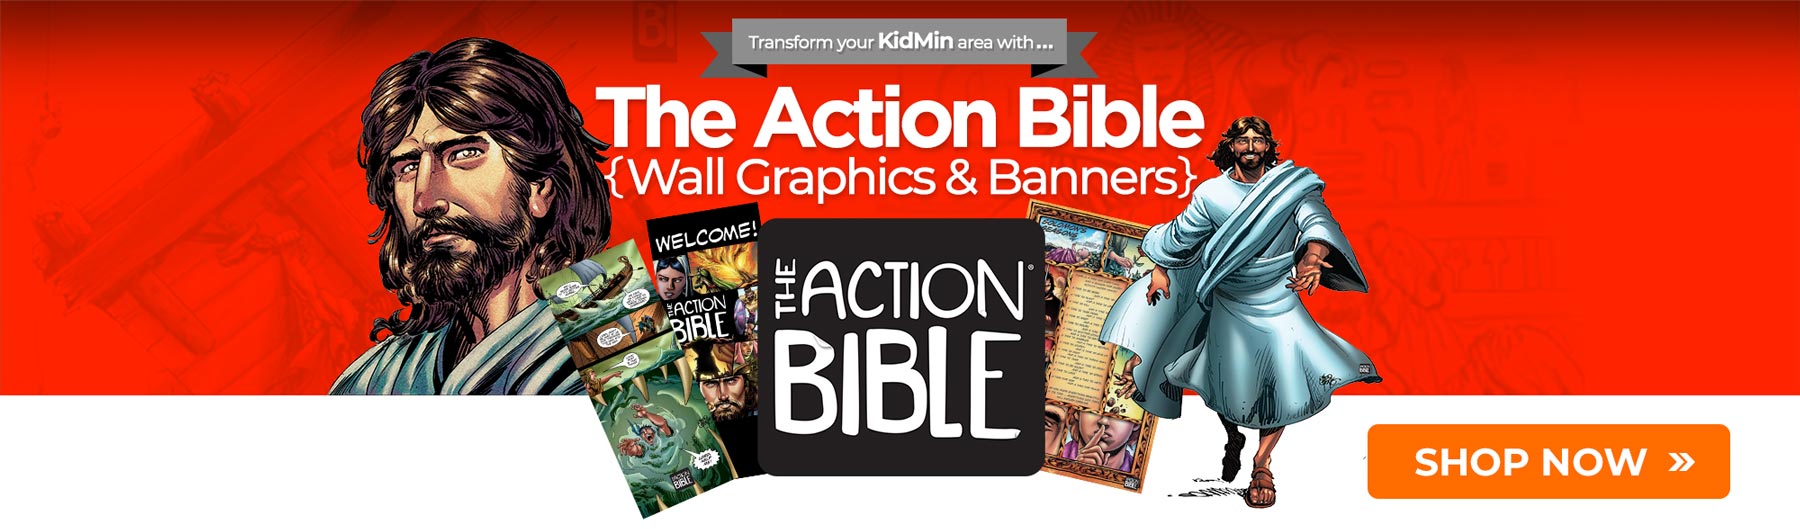 Action Bible posters and resources